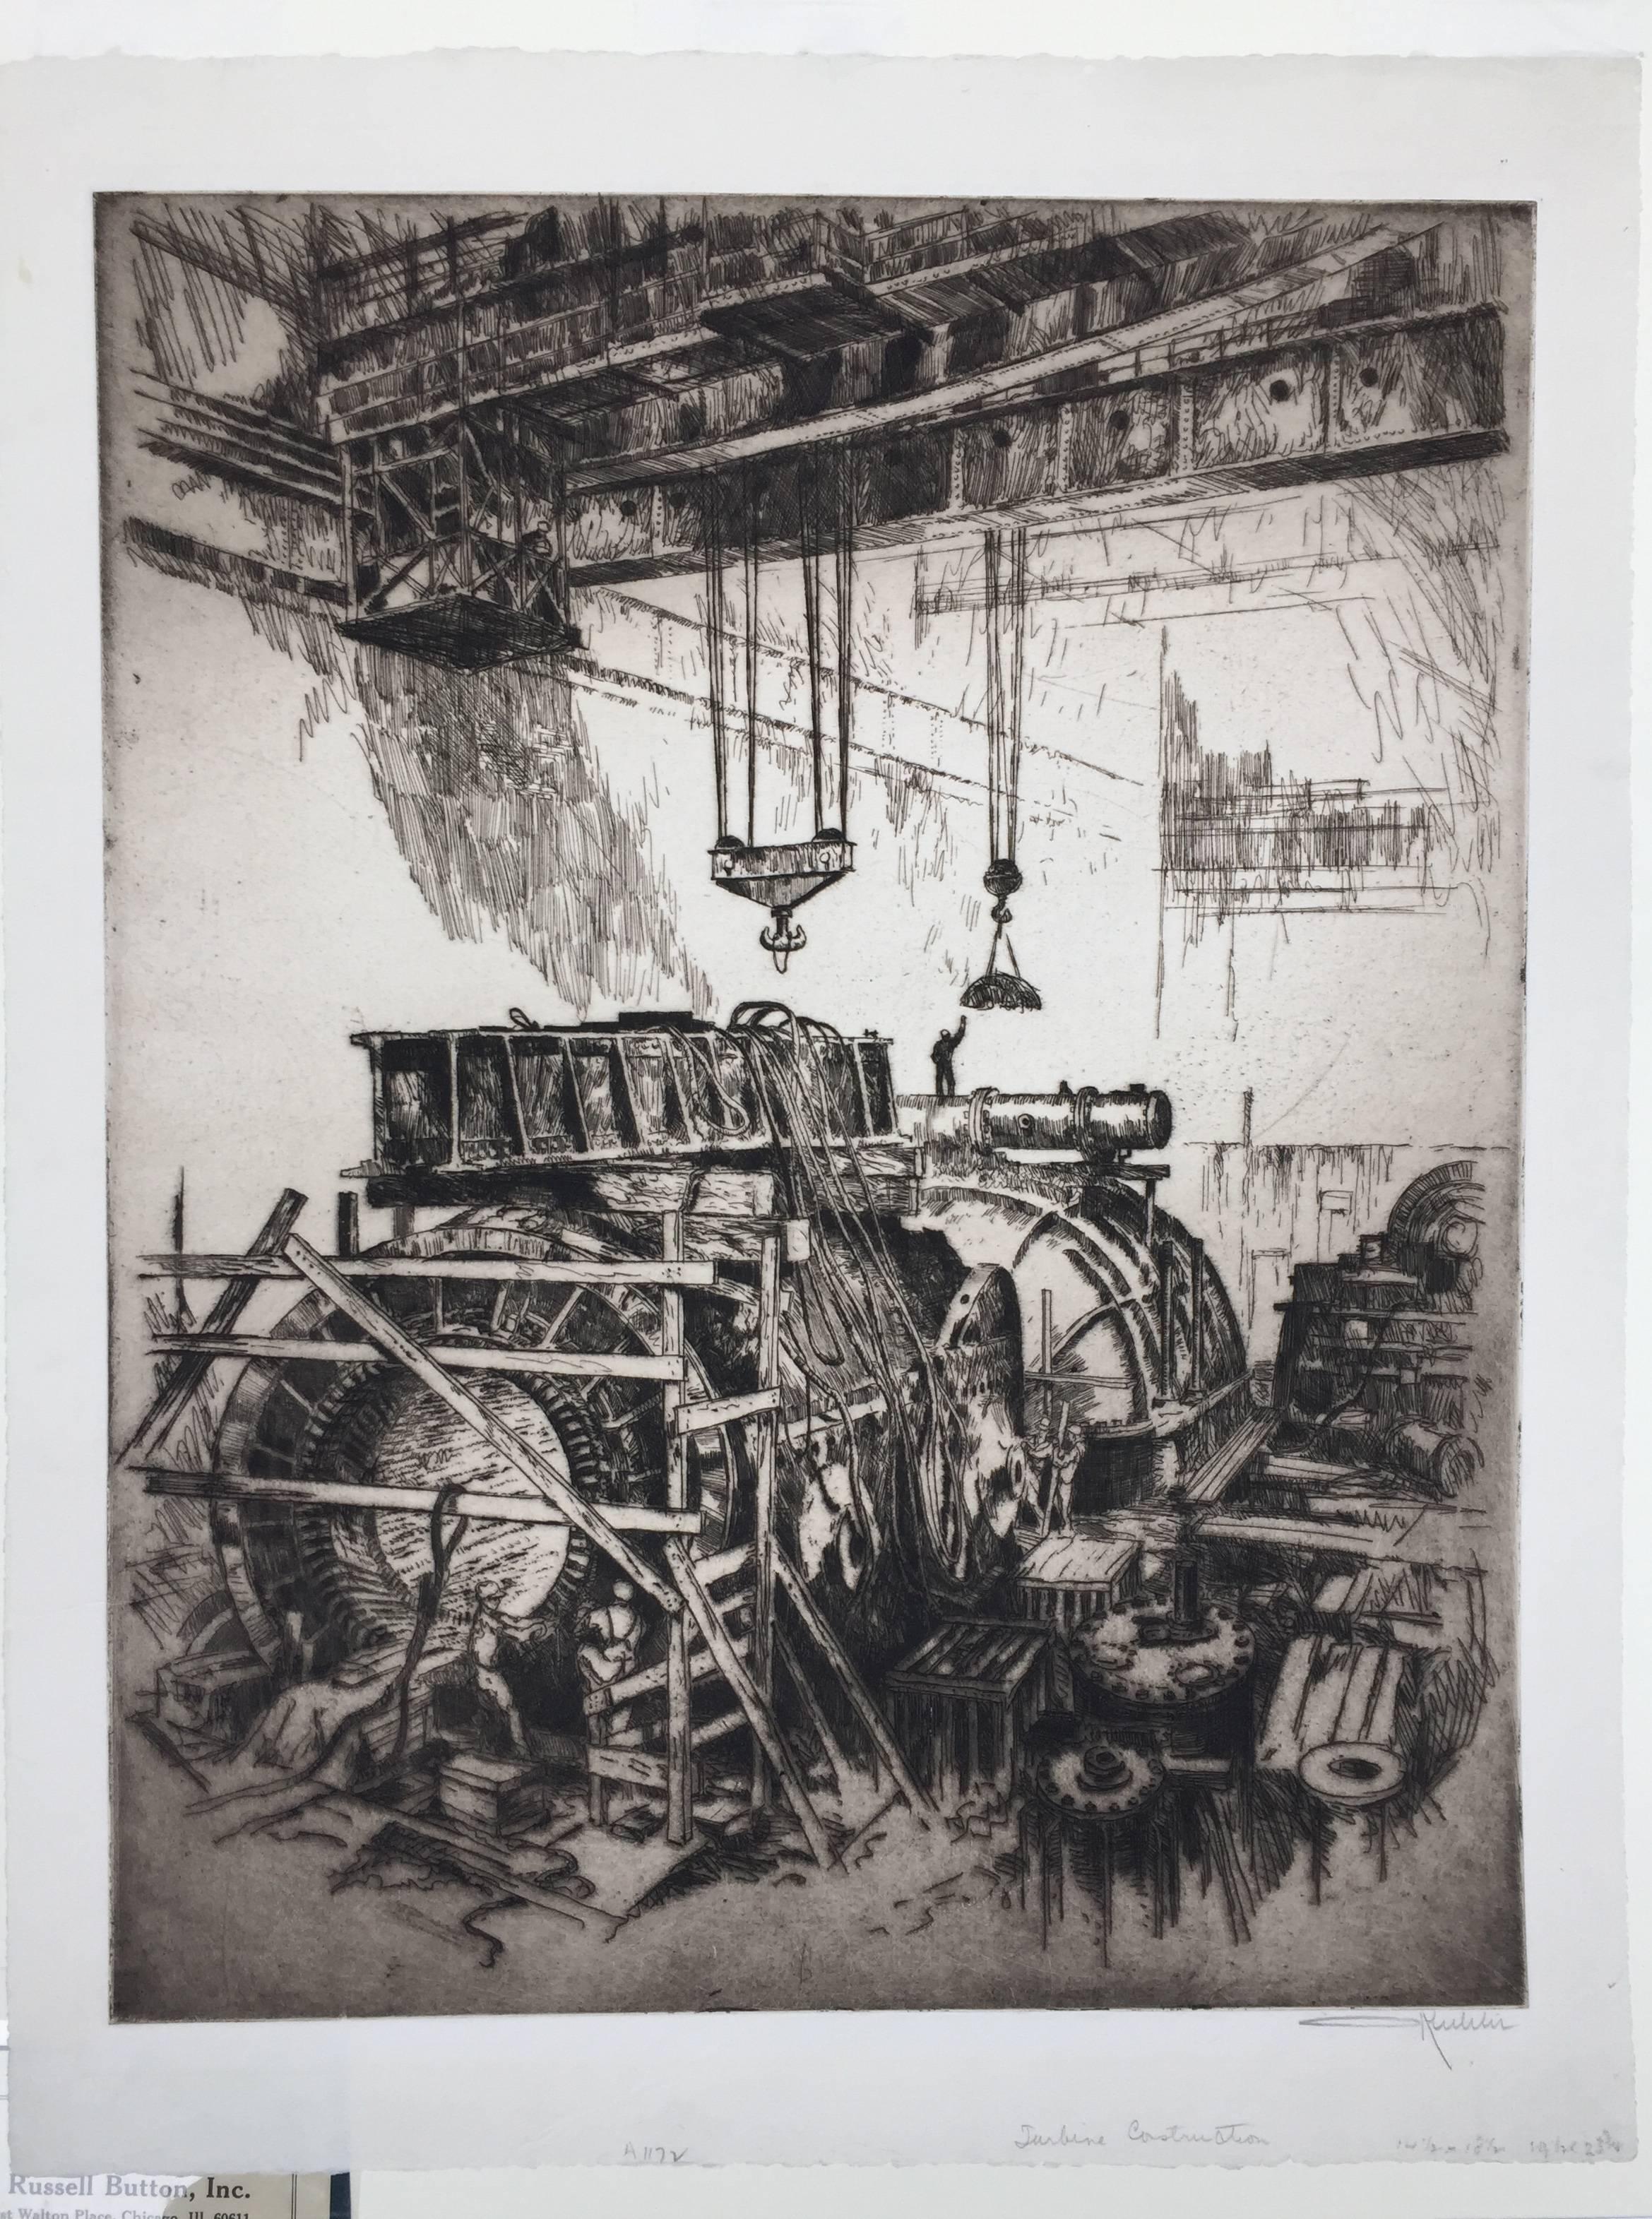 TURBINE CONSTRUCTION - Realist Print by Otto Kuhler